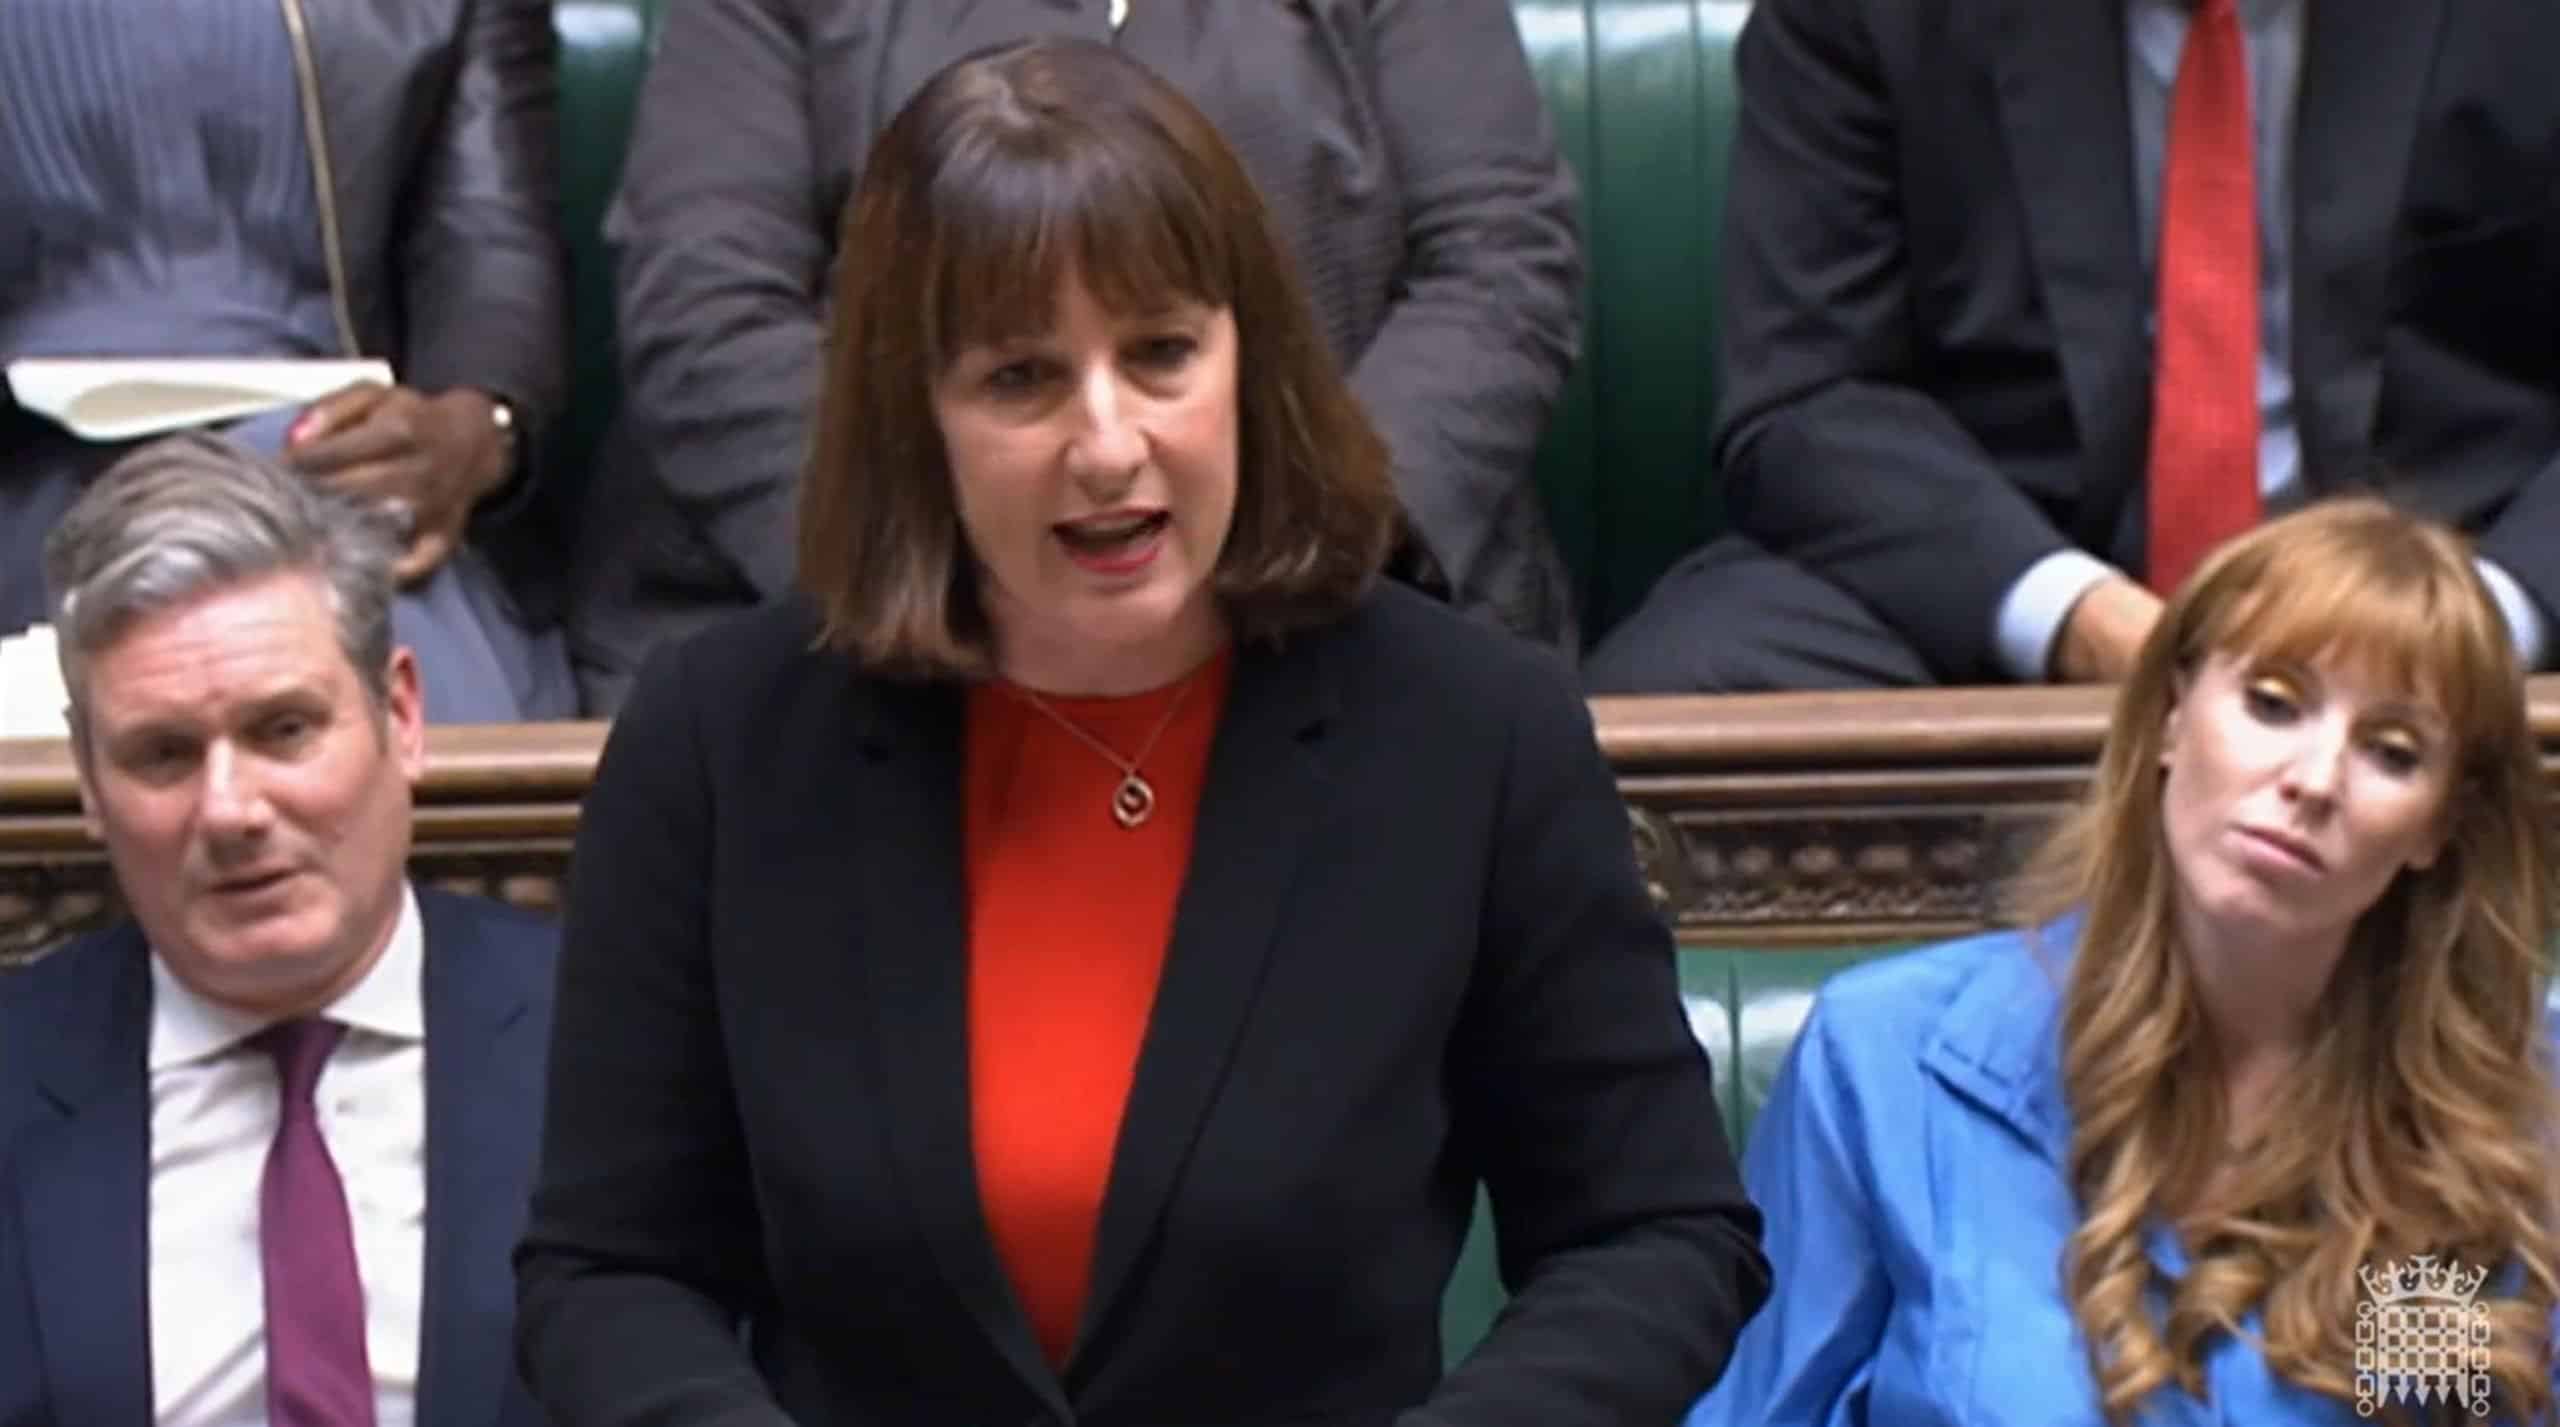 Rachel Reeves says Tory MP who criticised Rashford’s campaigning can ‘f*** off’